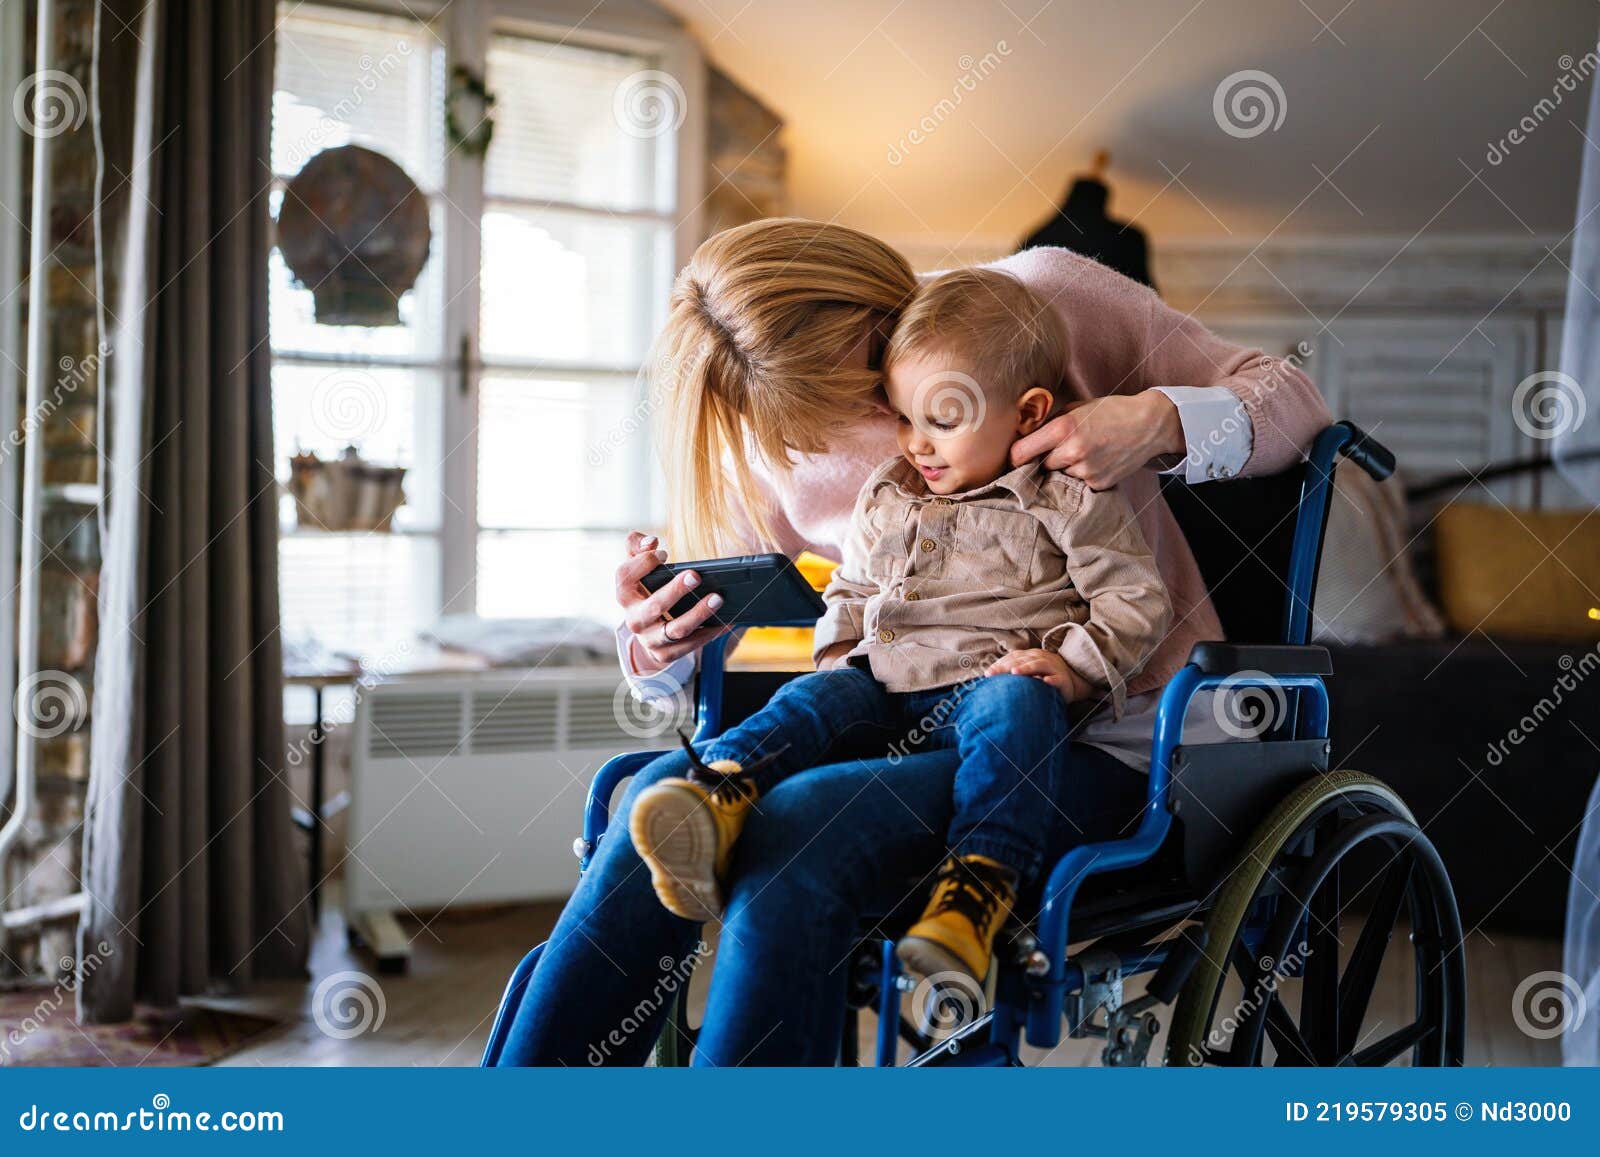 Happy Smiling Mother With Disability In Wheelchair Playing With Child